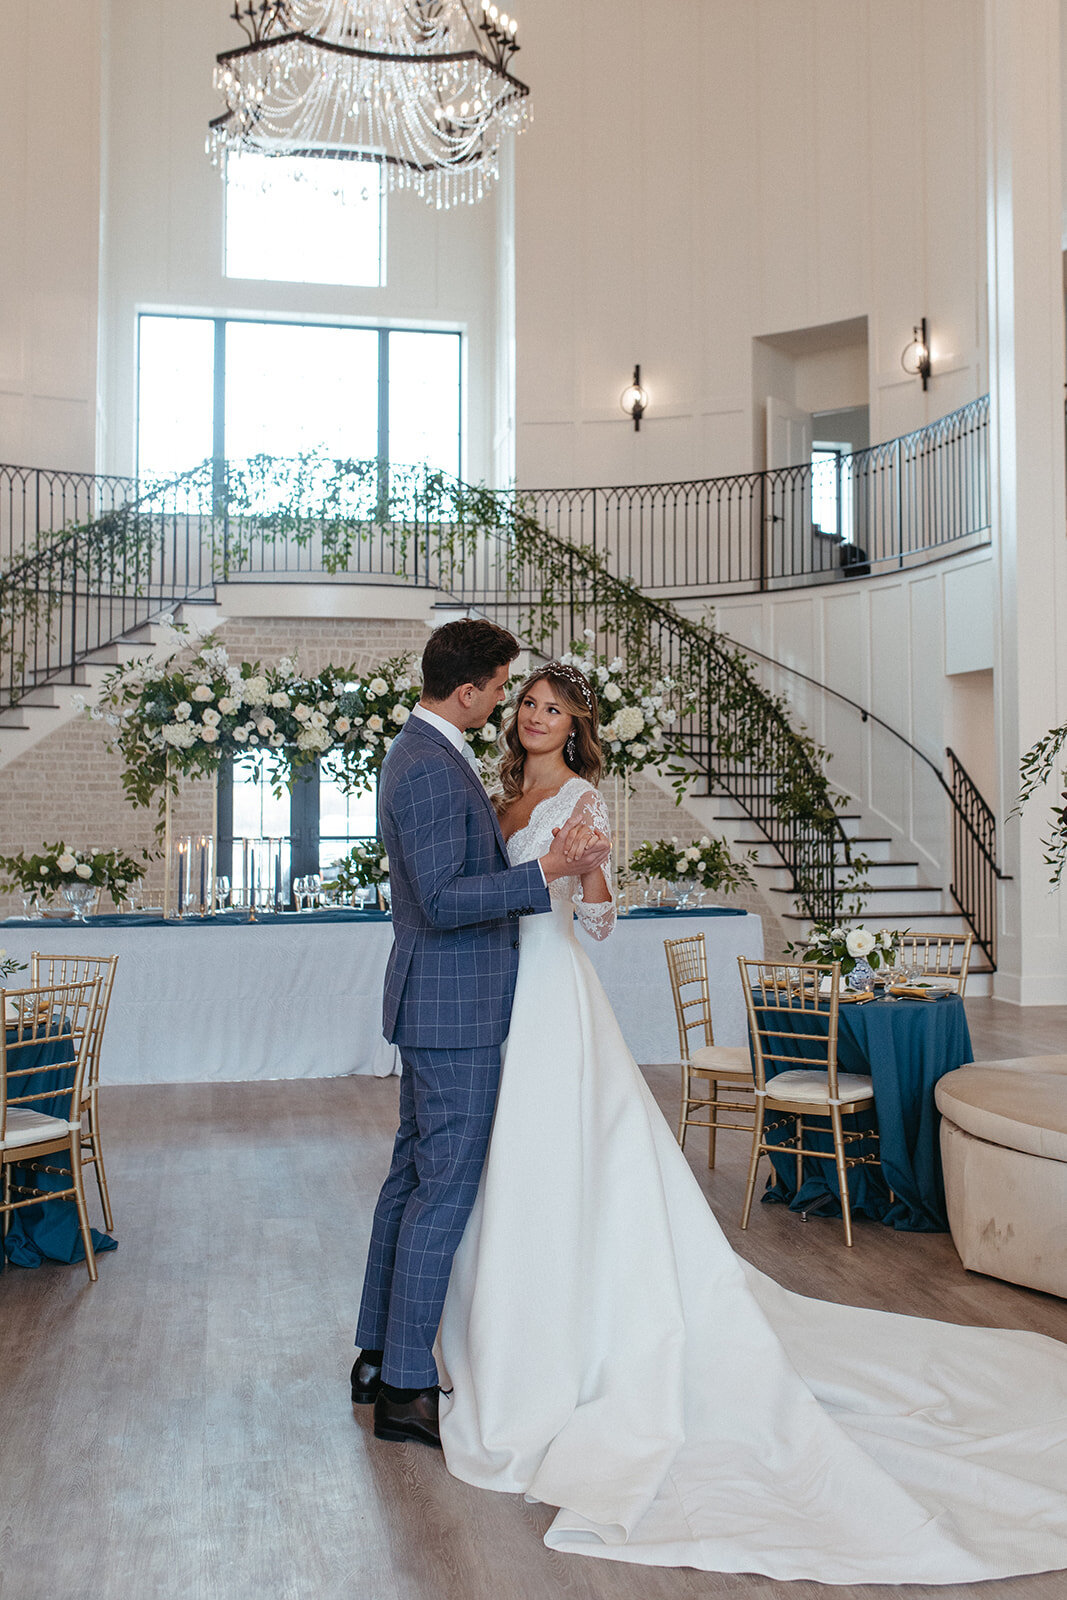 Bride and groom in a blue suit and white wedding gown dancing in a banquet room with white flowers and greenery.